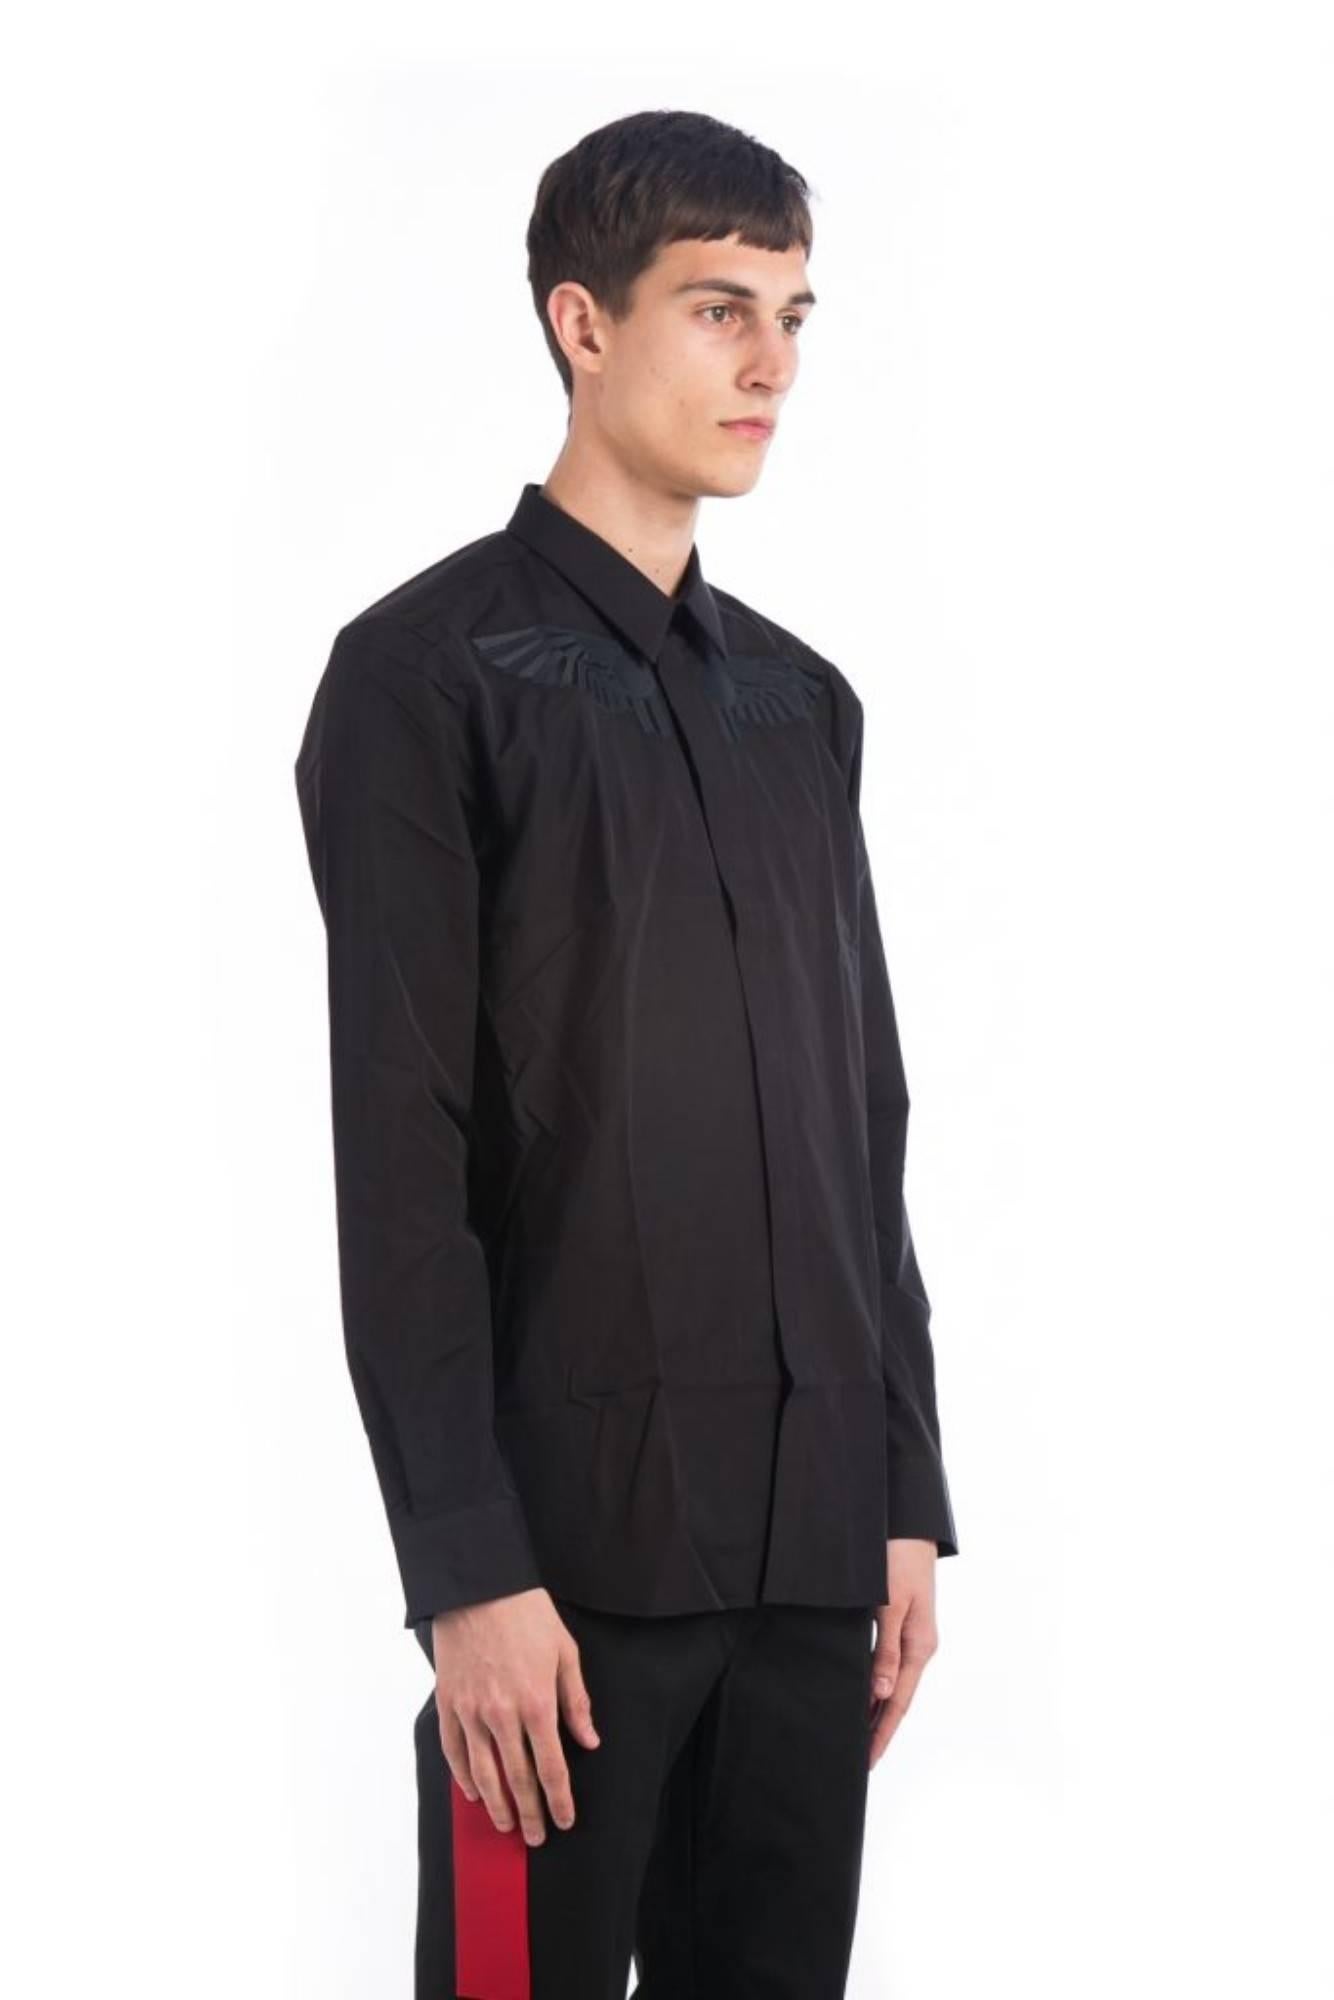 Wing Embroidered Shirt
Black shirt
Embroidered wing detail on chest
Classic collar
Concealed front button placket
Long sleeves
Single button cuffs
Curved hemline
Composition 100% cotton